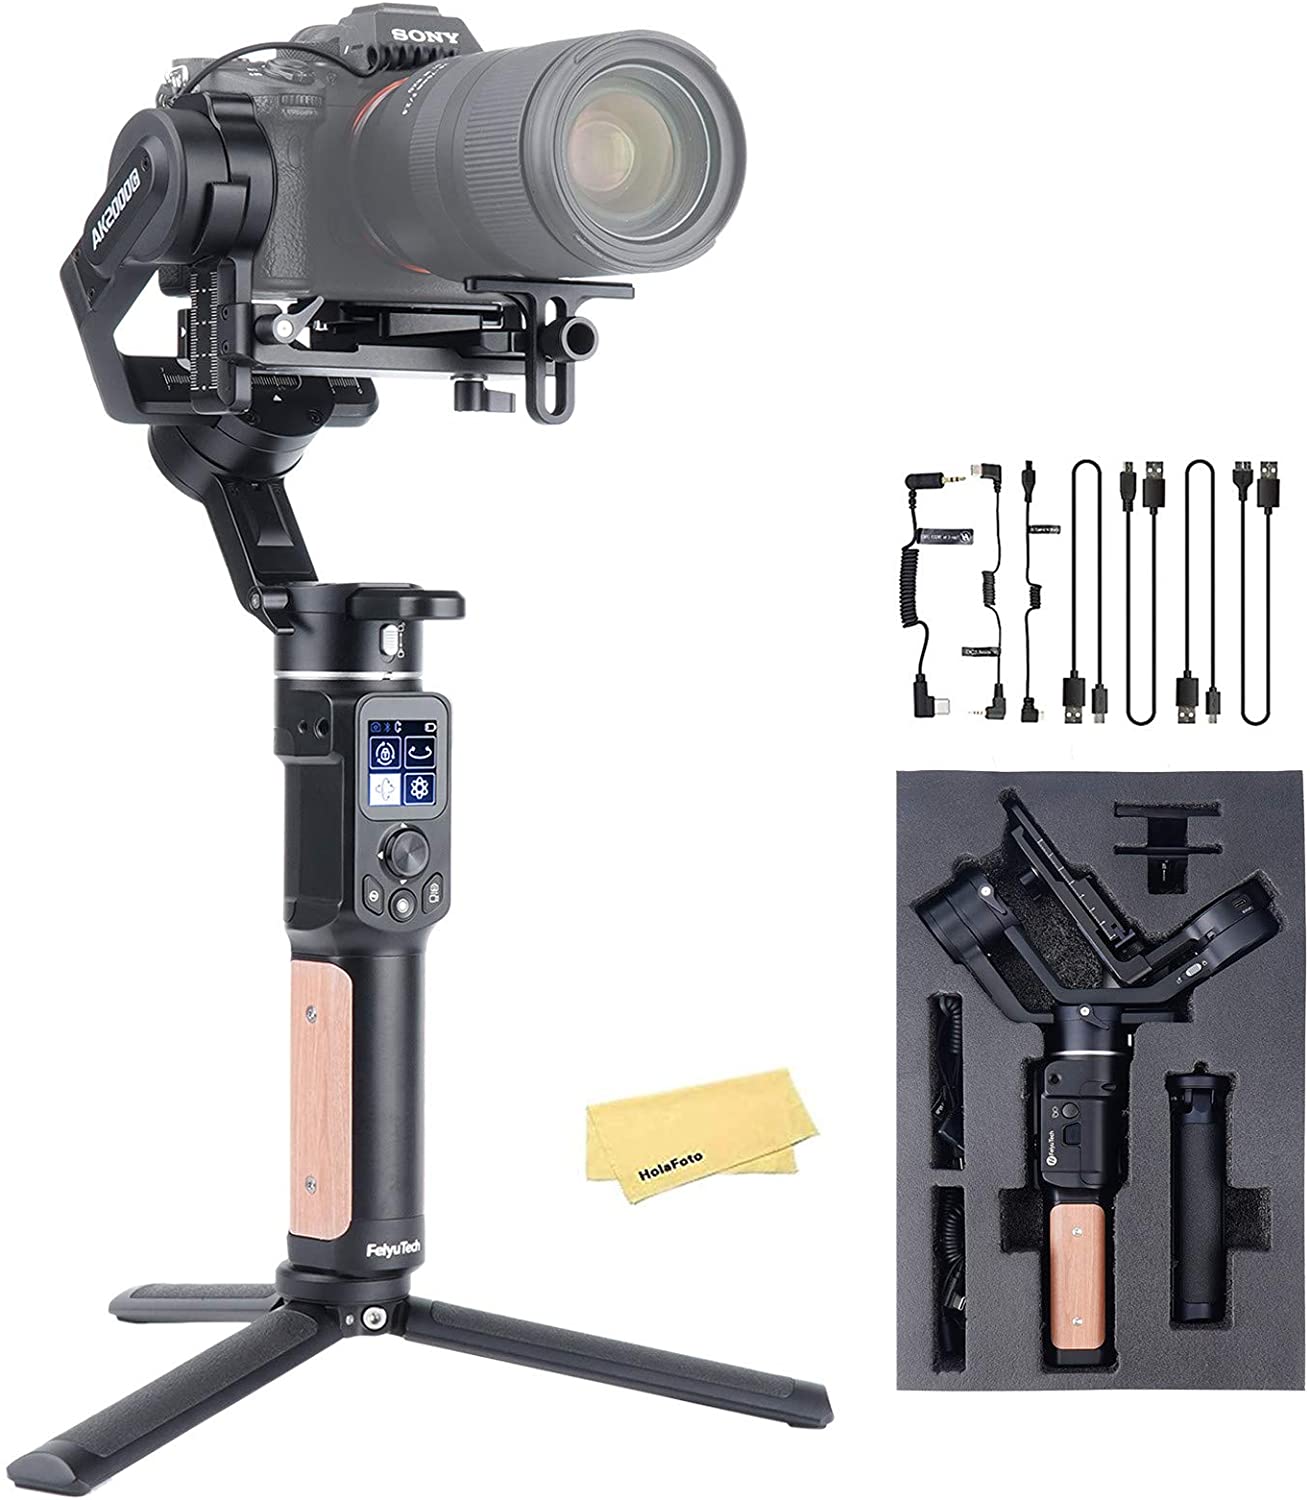 FeiyuTech AkC Handheld Camera Gimbal Stabilizer for DSLR and